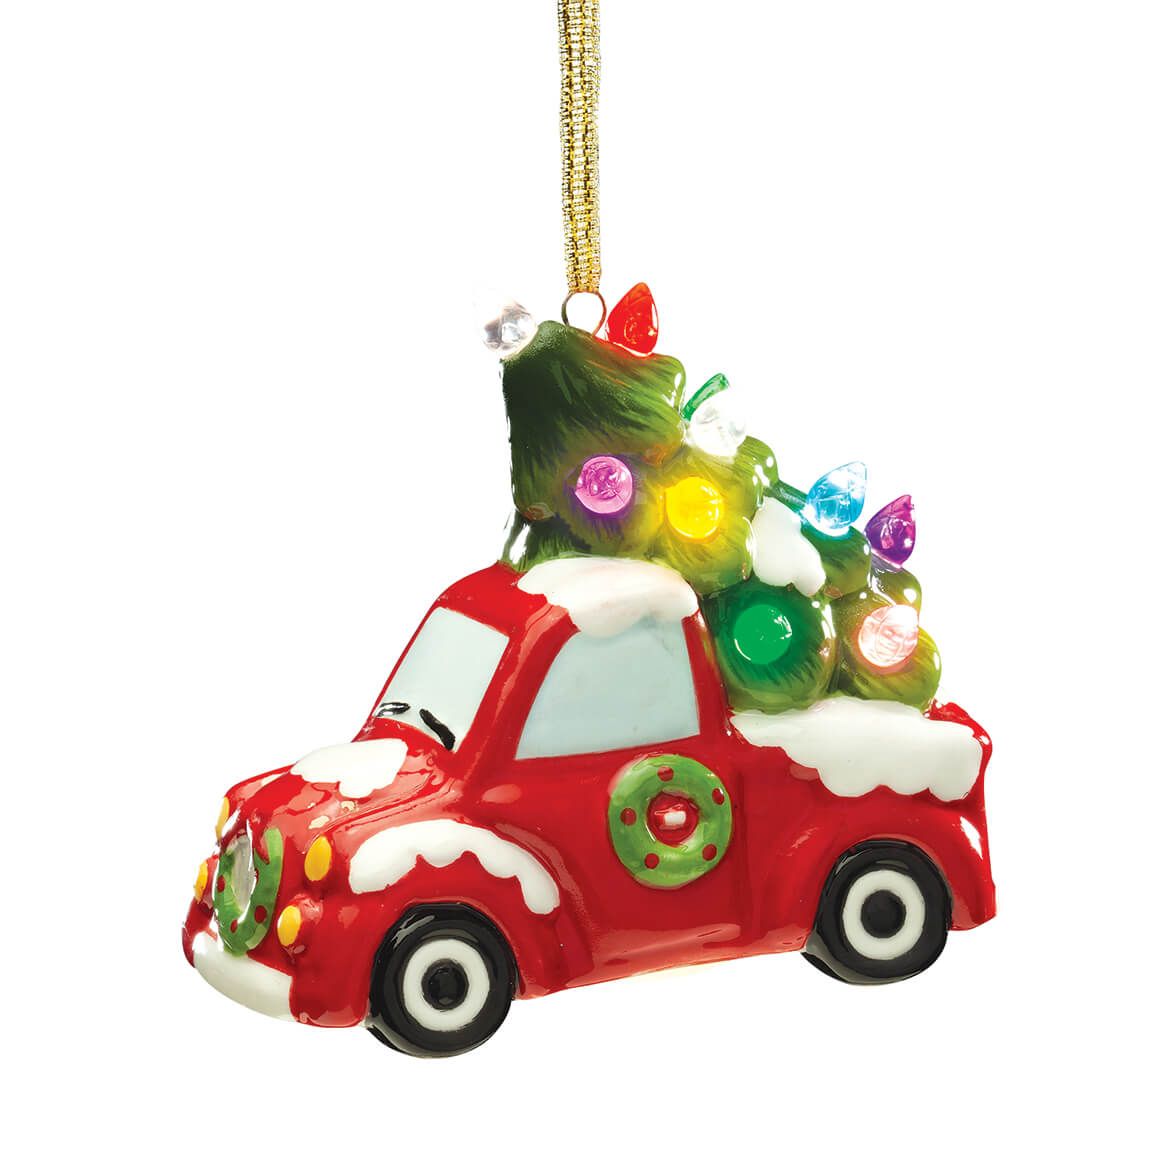 Lighted Red Truck Ornament + '-' + 372227